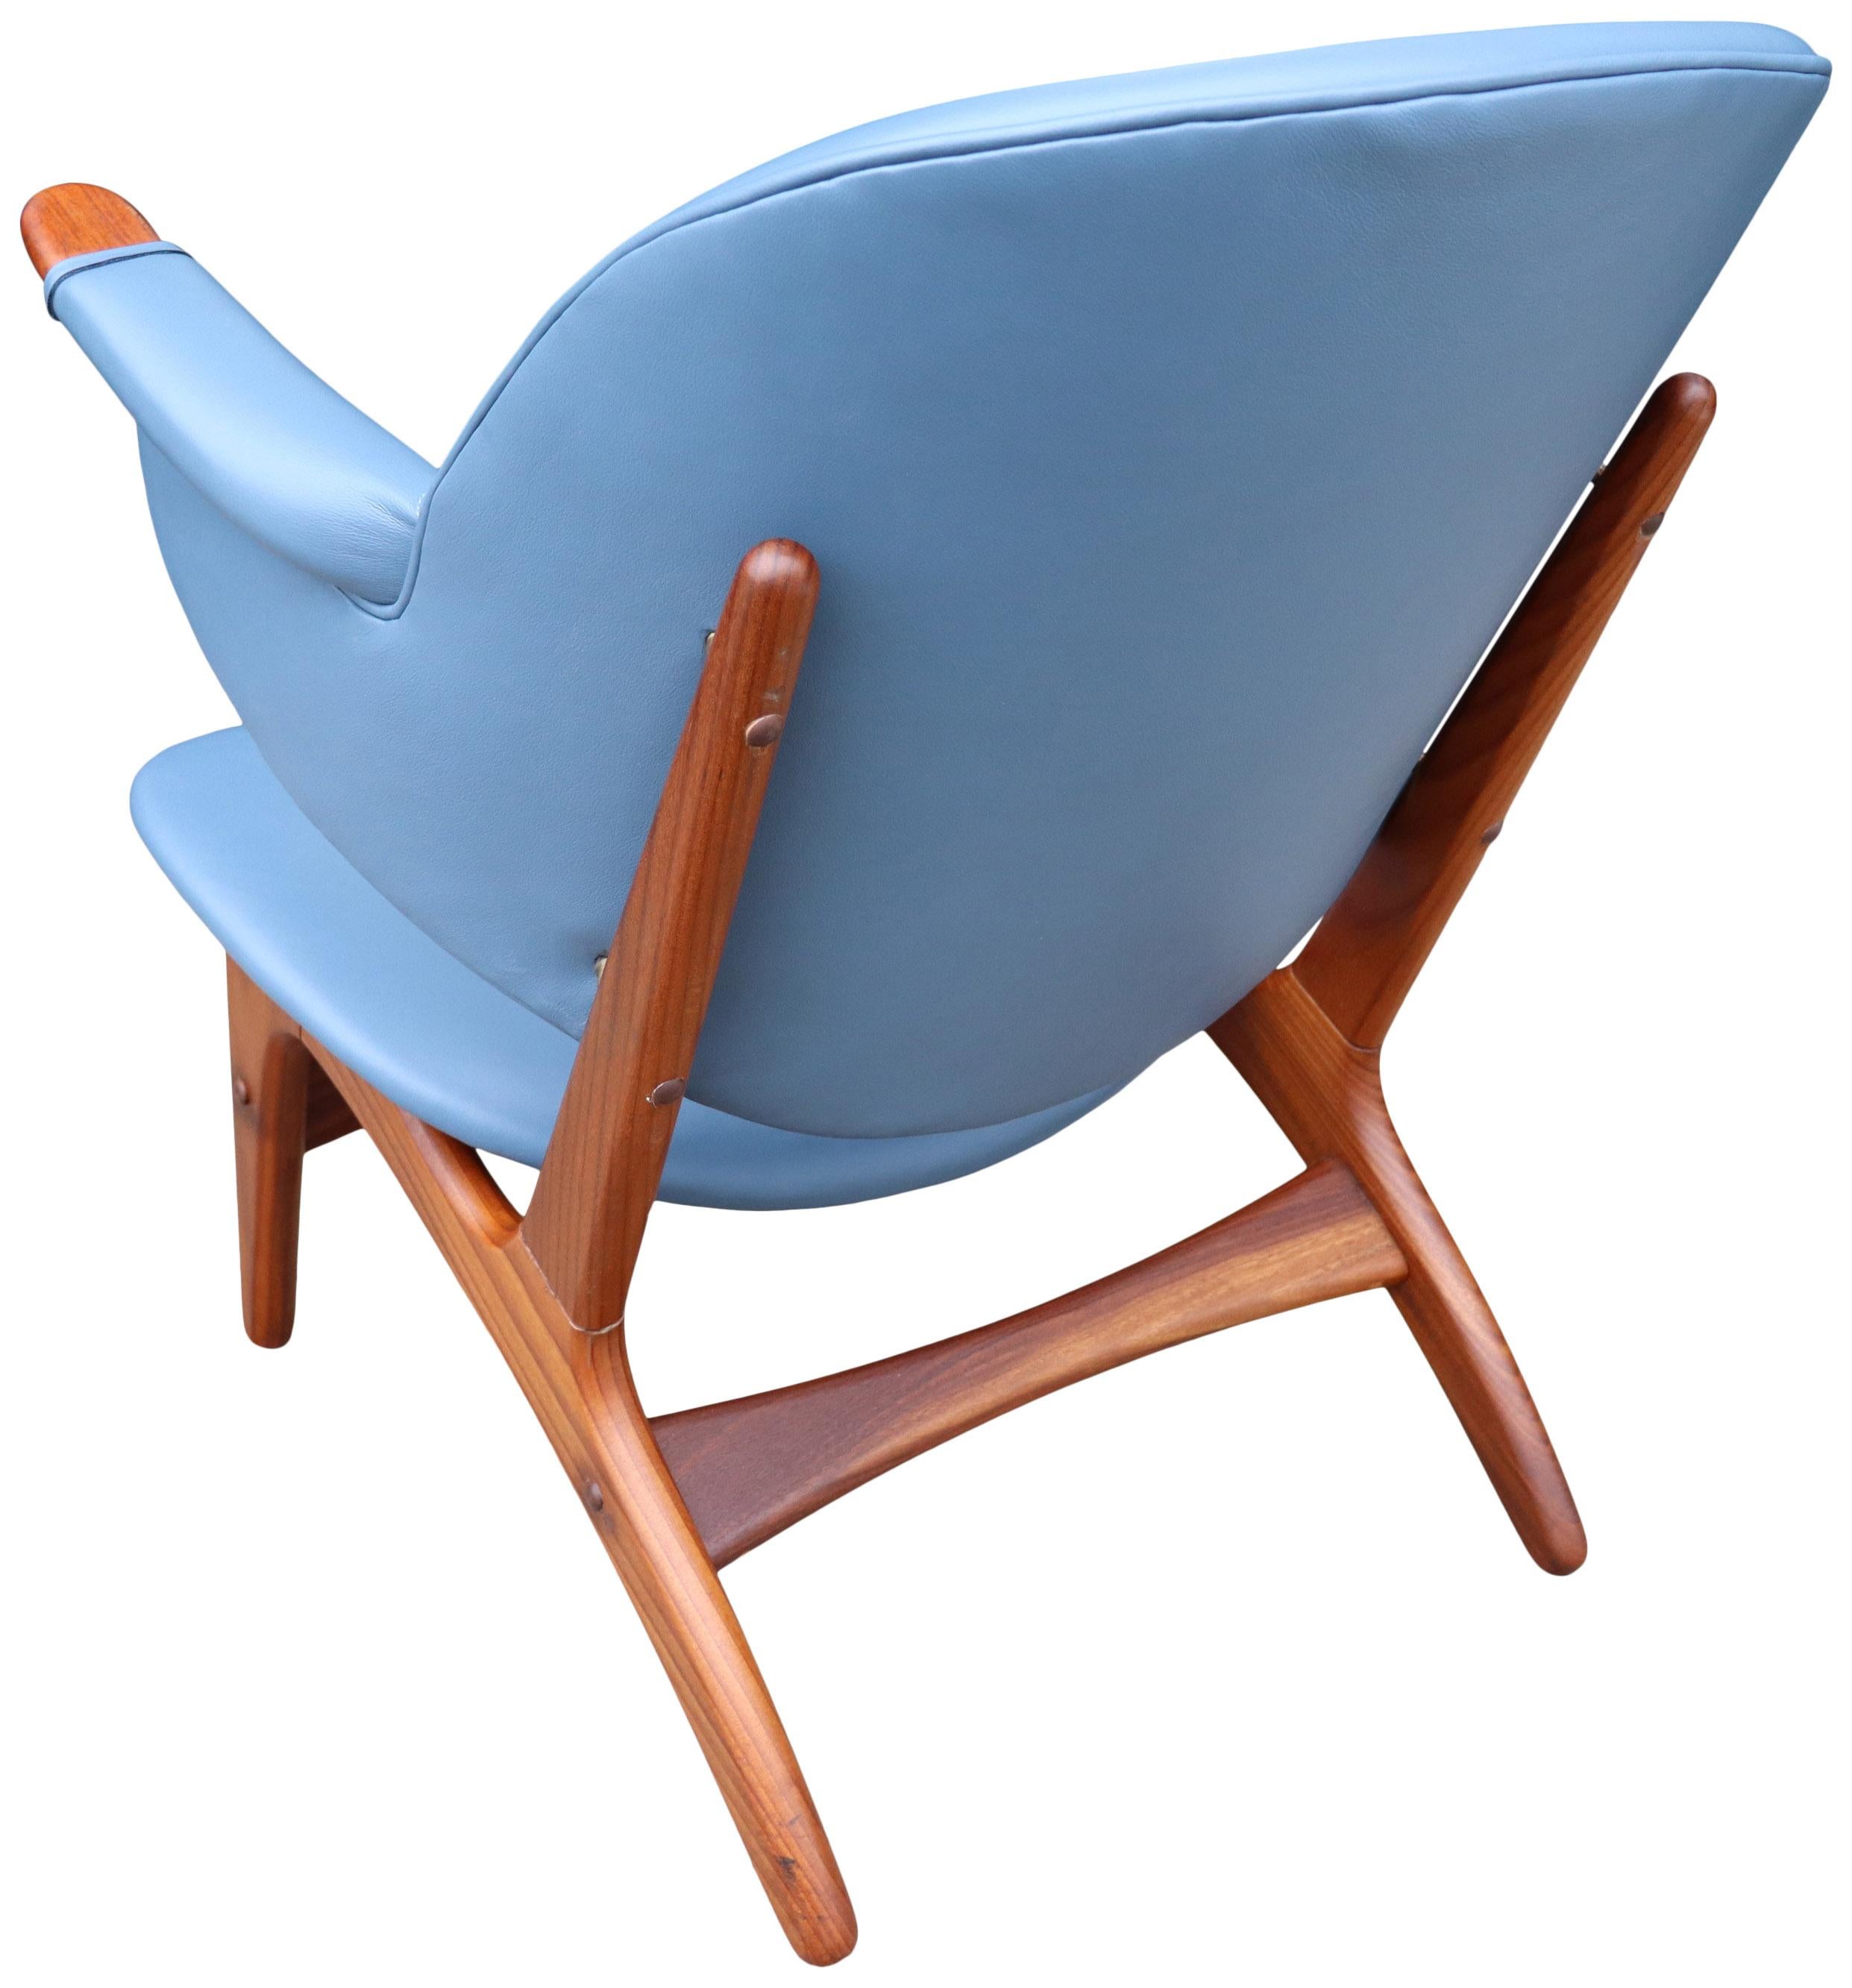 Brass Arne Hovmand-Olsen Lounge Chair in Blue Leather For Sale